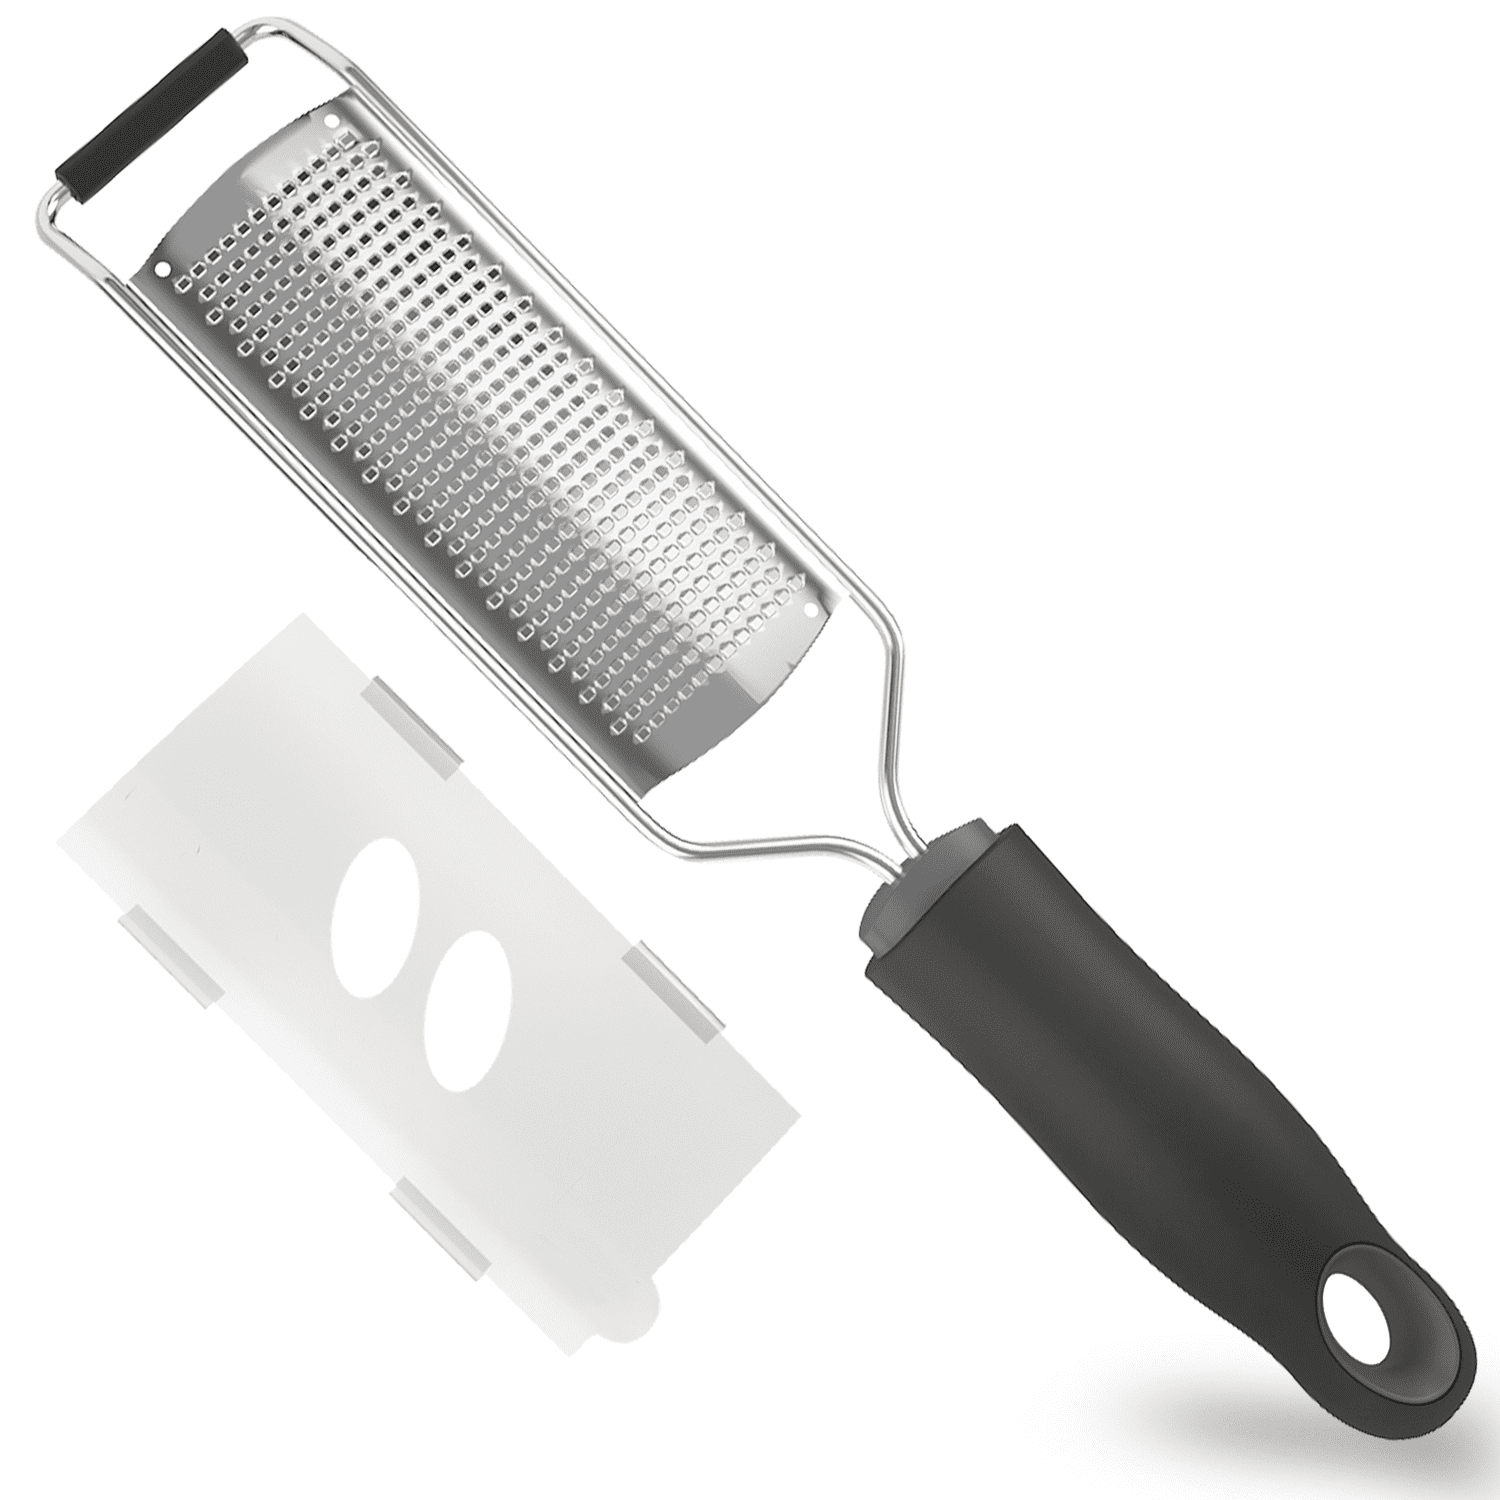 Akamino Cheese Grater, Grater Lemon with Food Storage Container & Lid  Grinder Grater for kitchen - Perfect For Hard Parmesan，Ginger, Vegetables